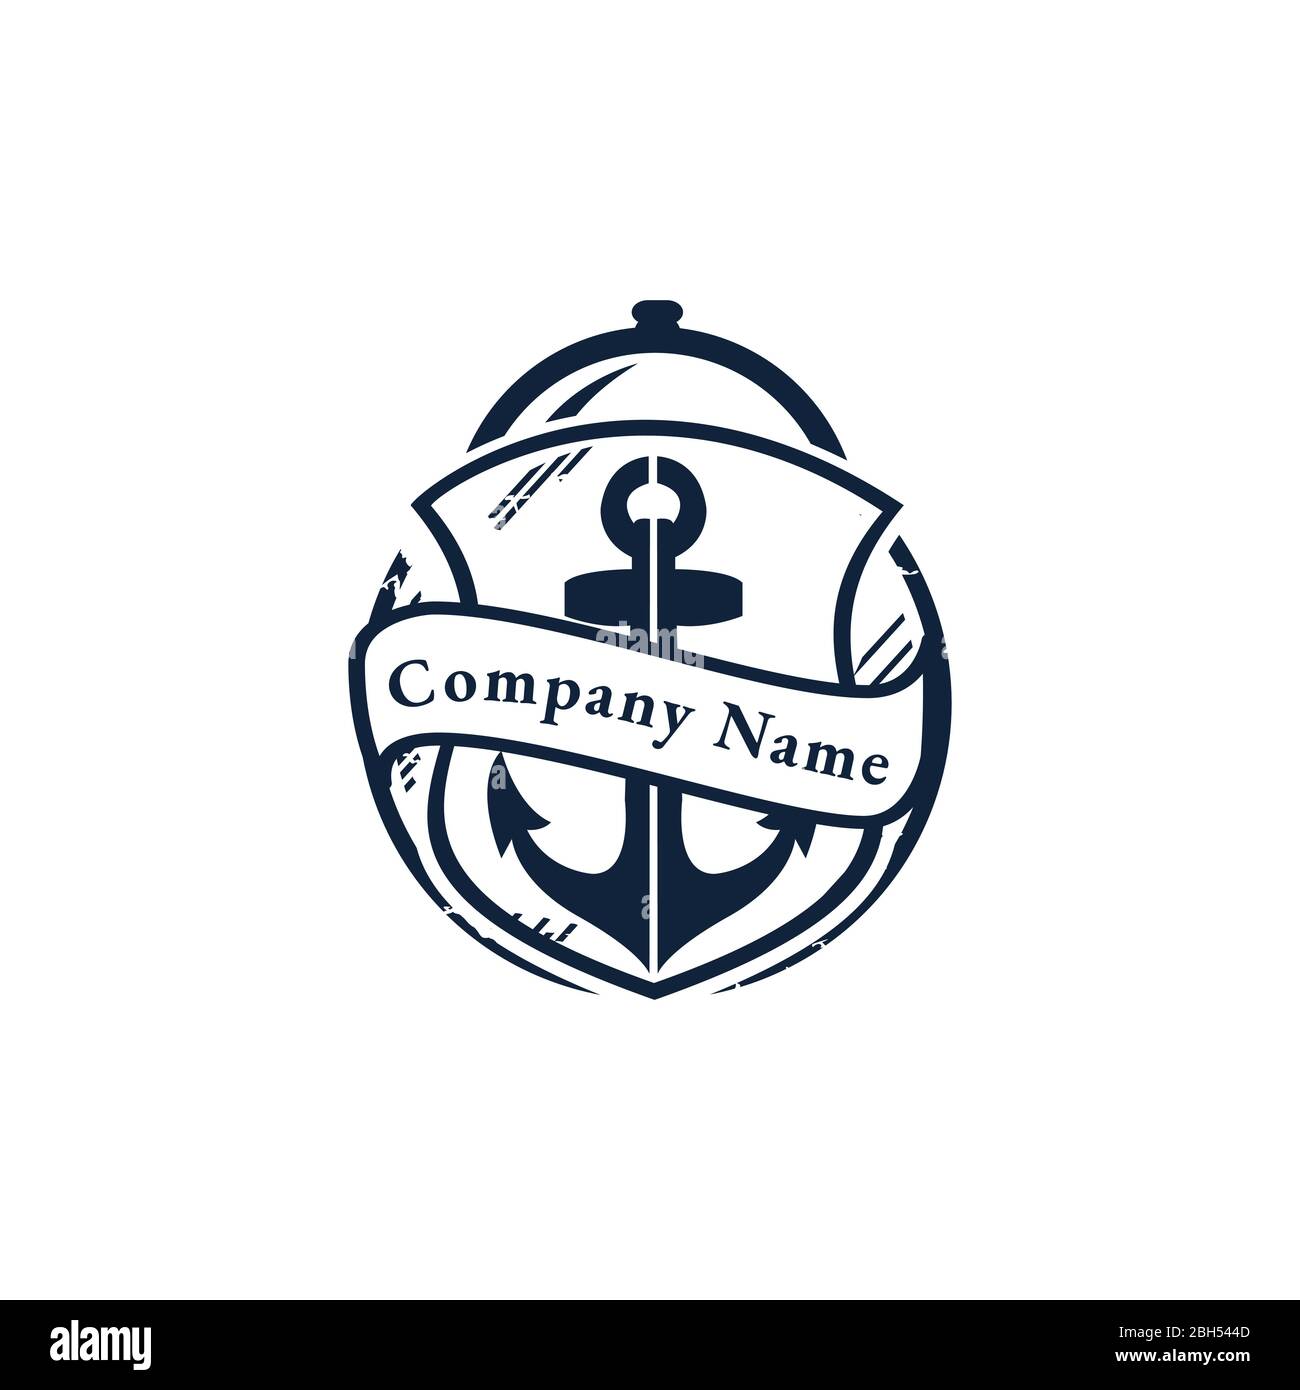 Vintage Retro Nautical Badger And Labels Stock Vector